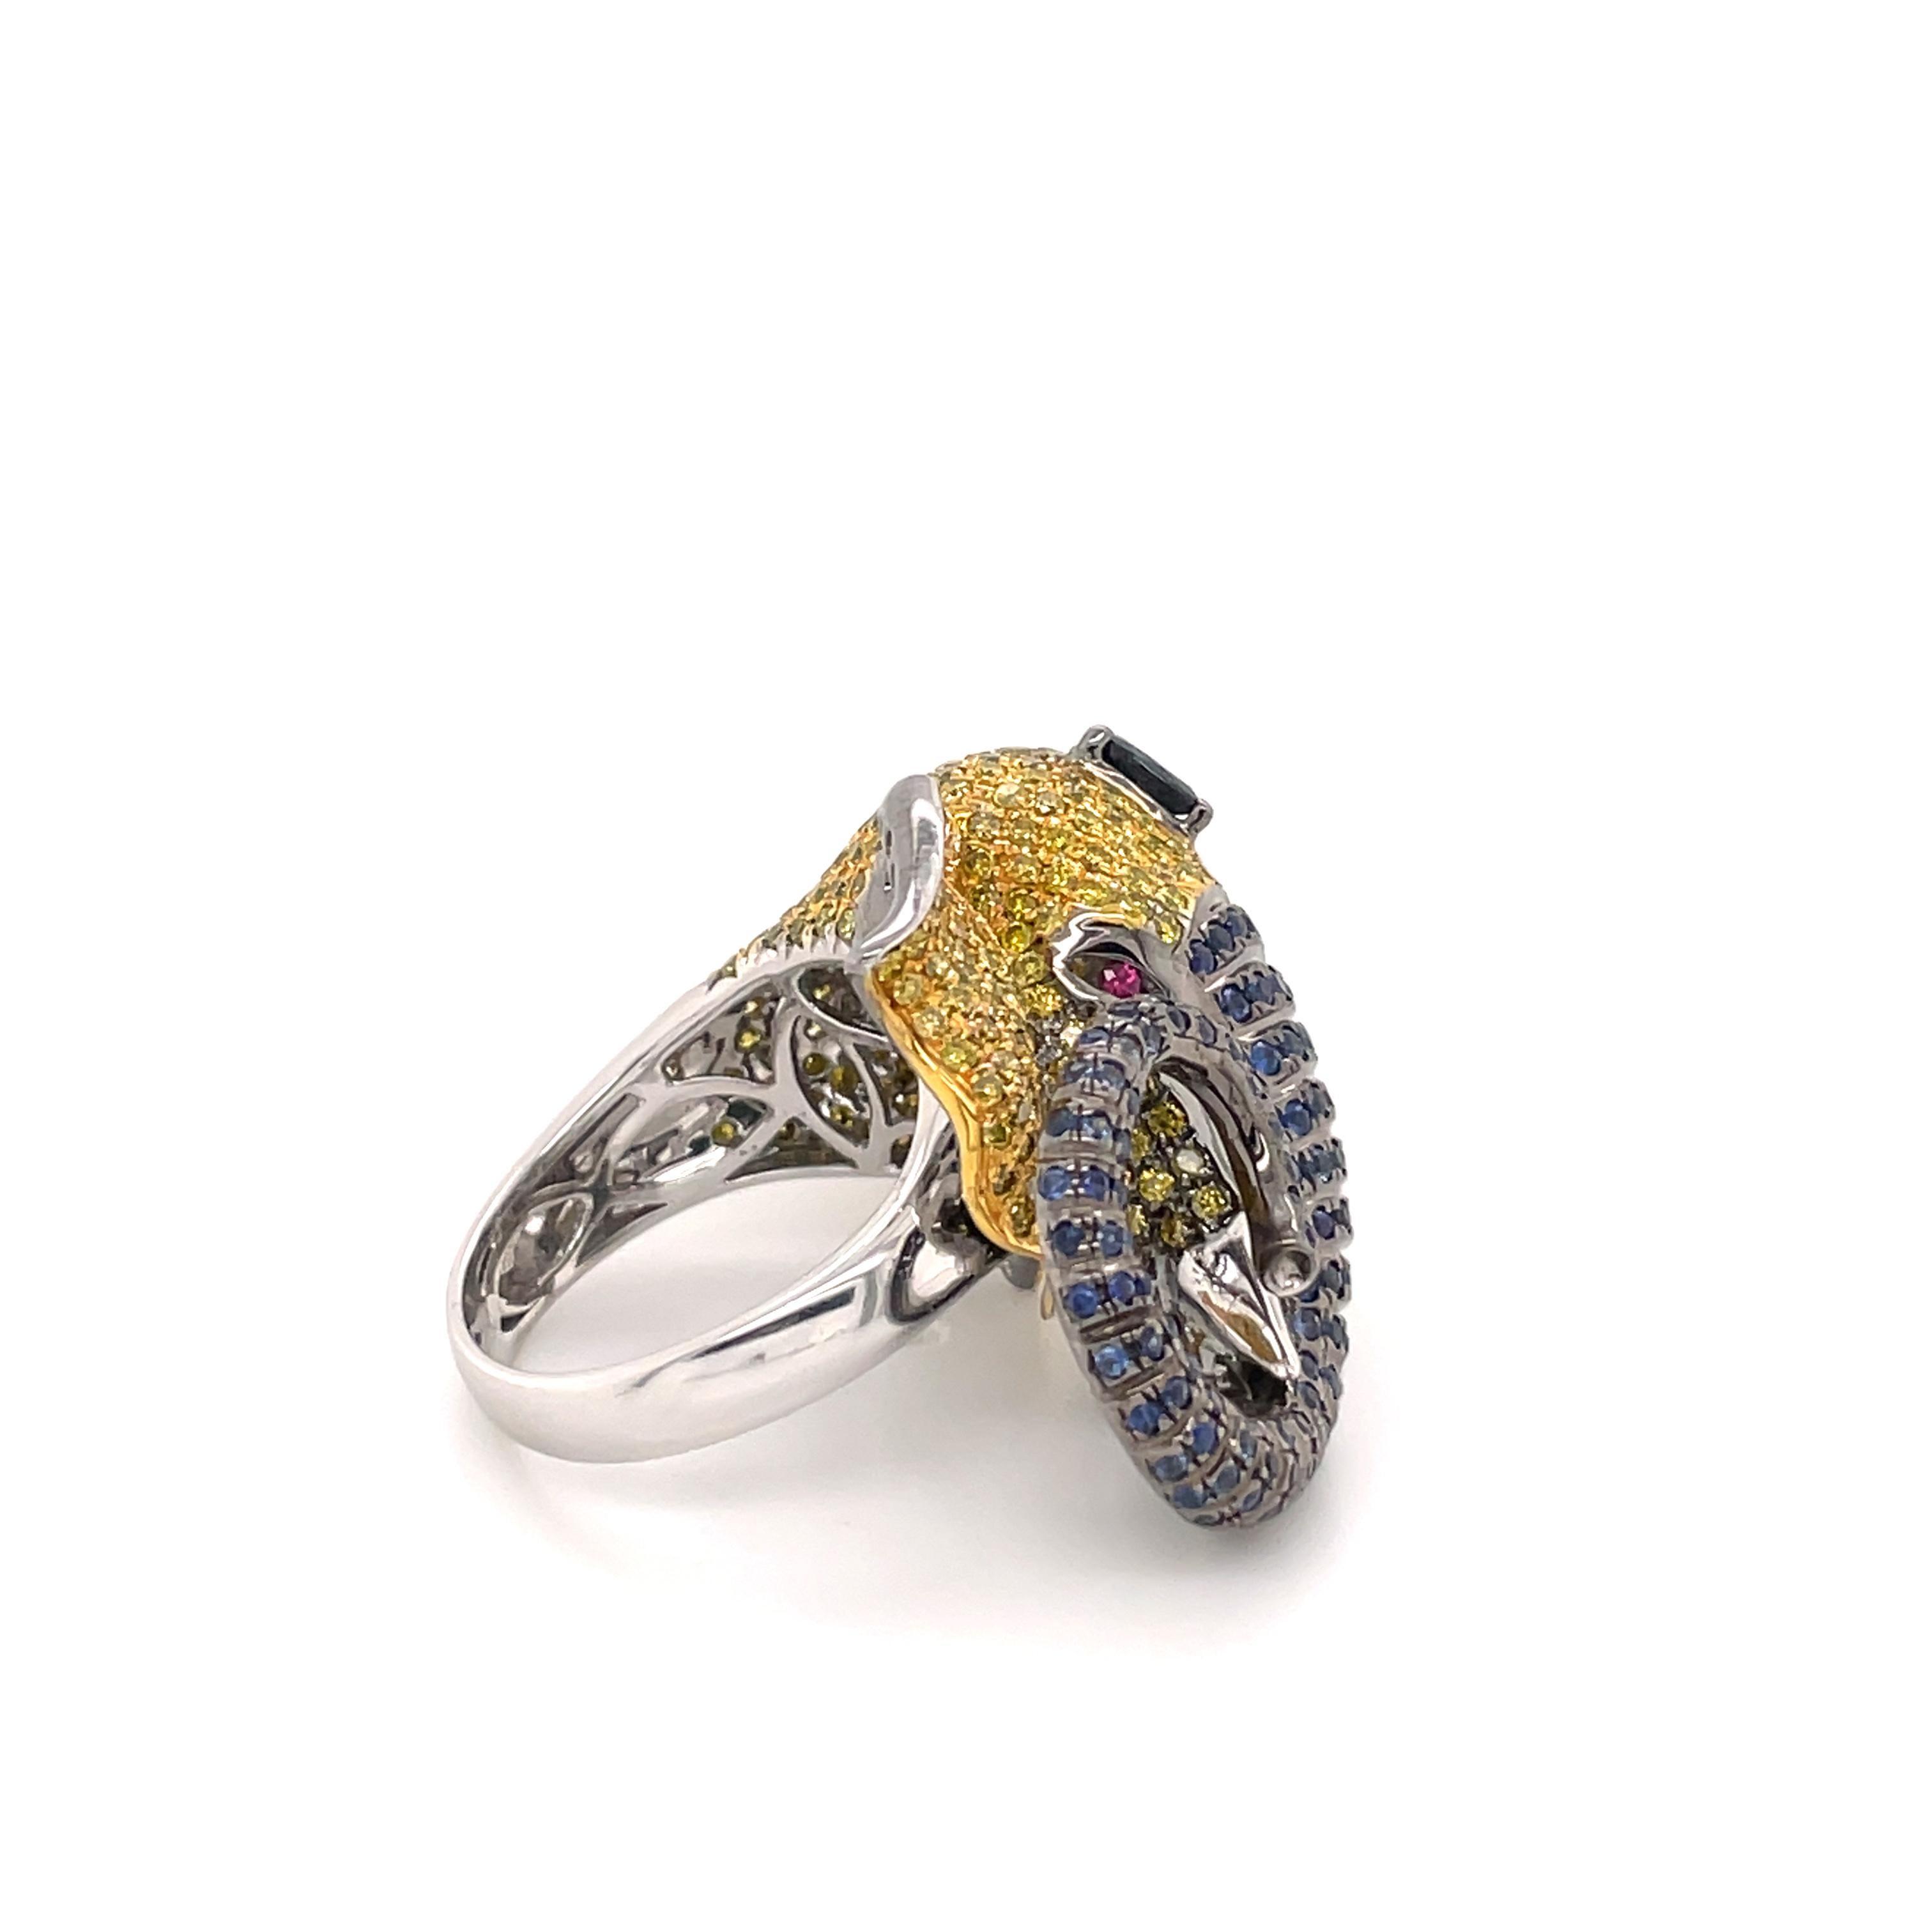 Behold a masterpiece of artistry and symbolism: an Elephant head ring adorned with rich details. This exquisite ring features an intricately designed elephant head with a sapphire trunk, capturing the grace and strength of this majestic creature.